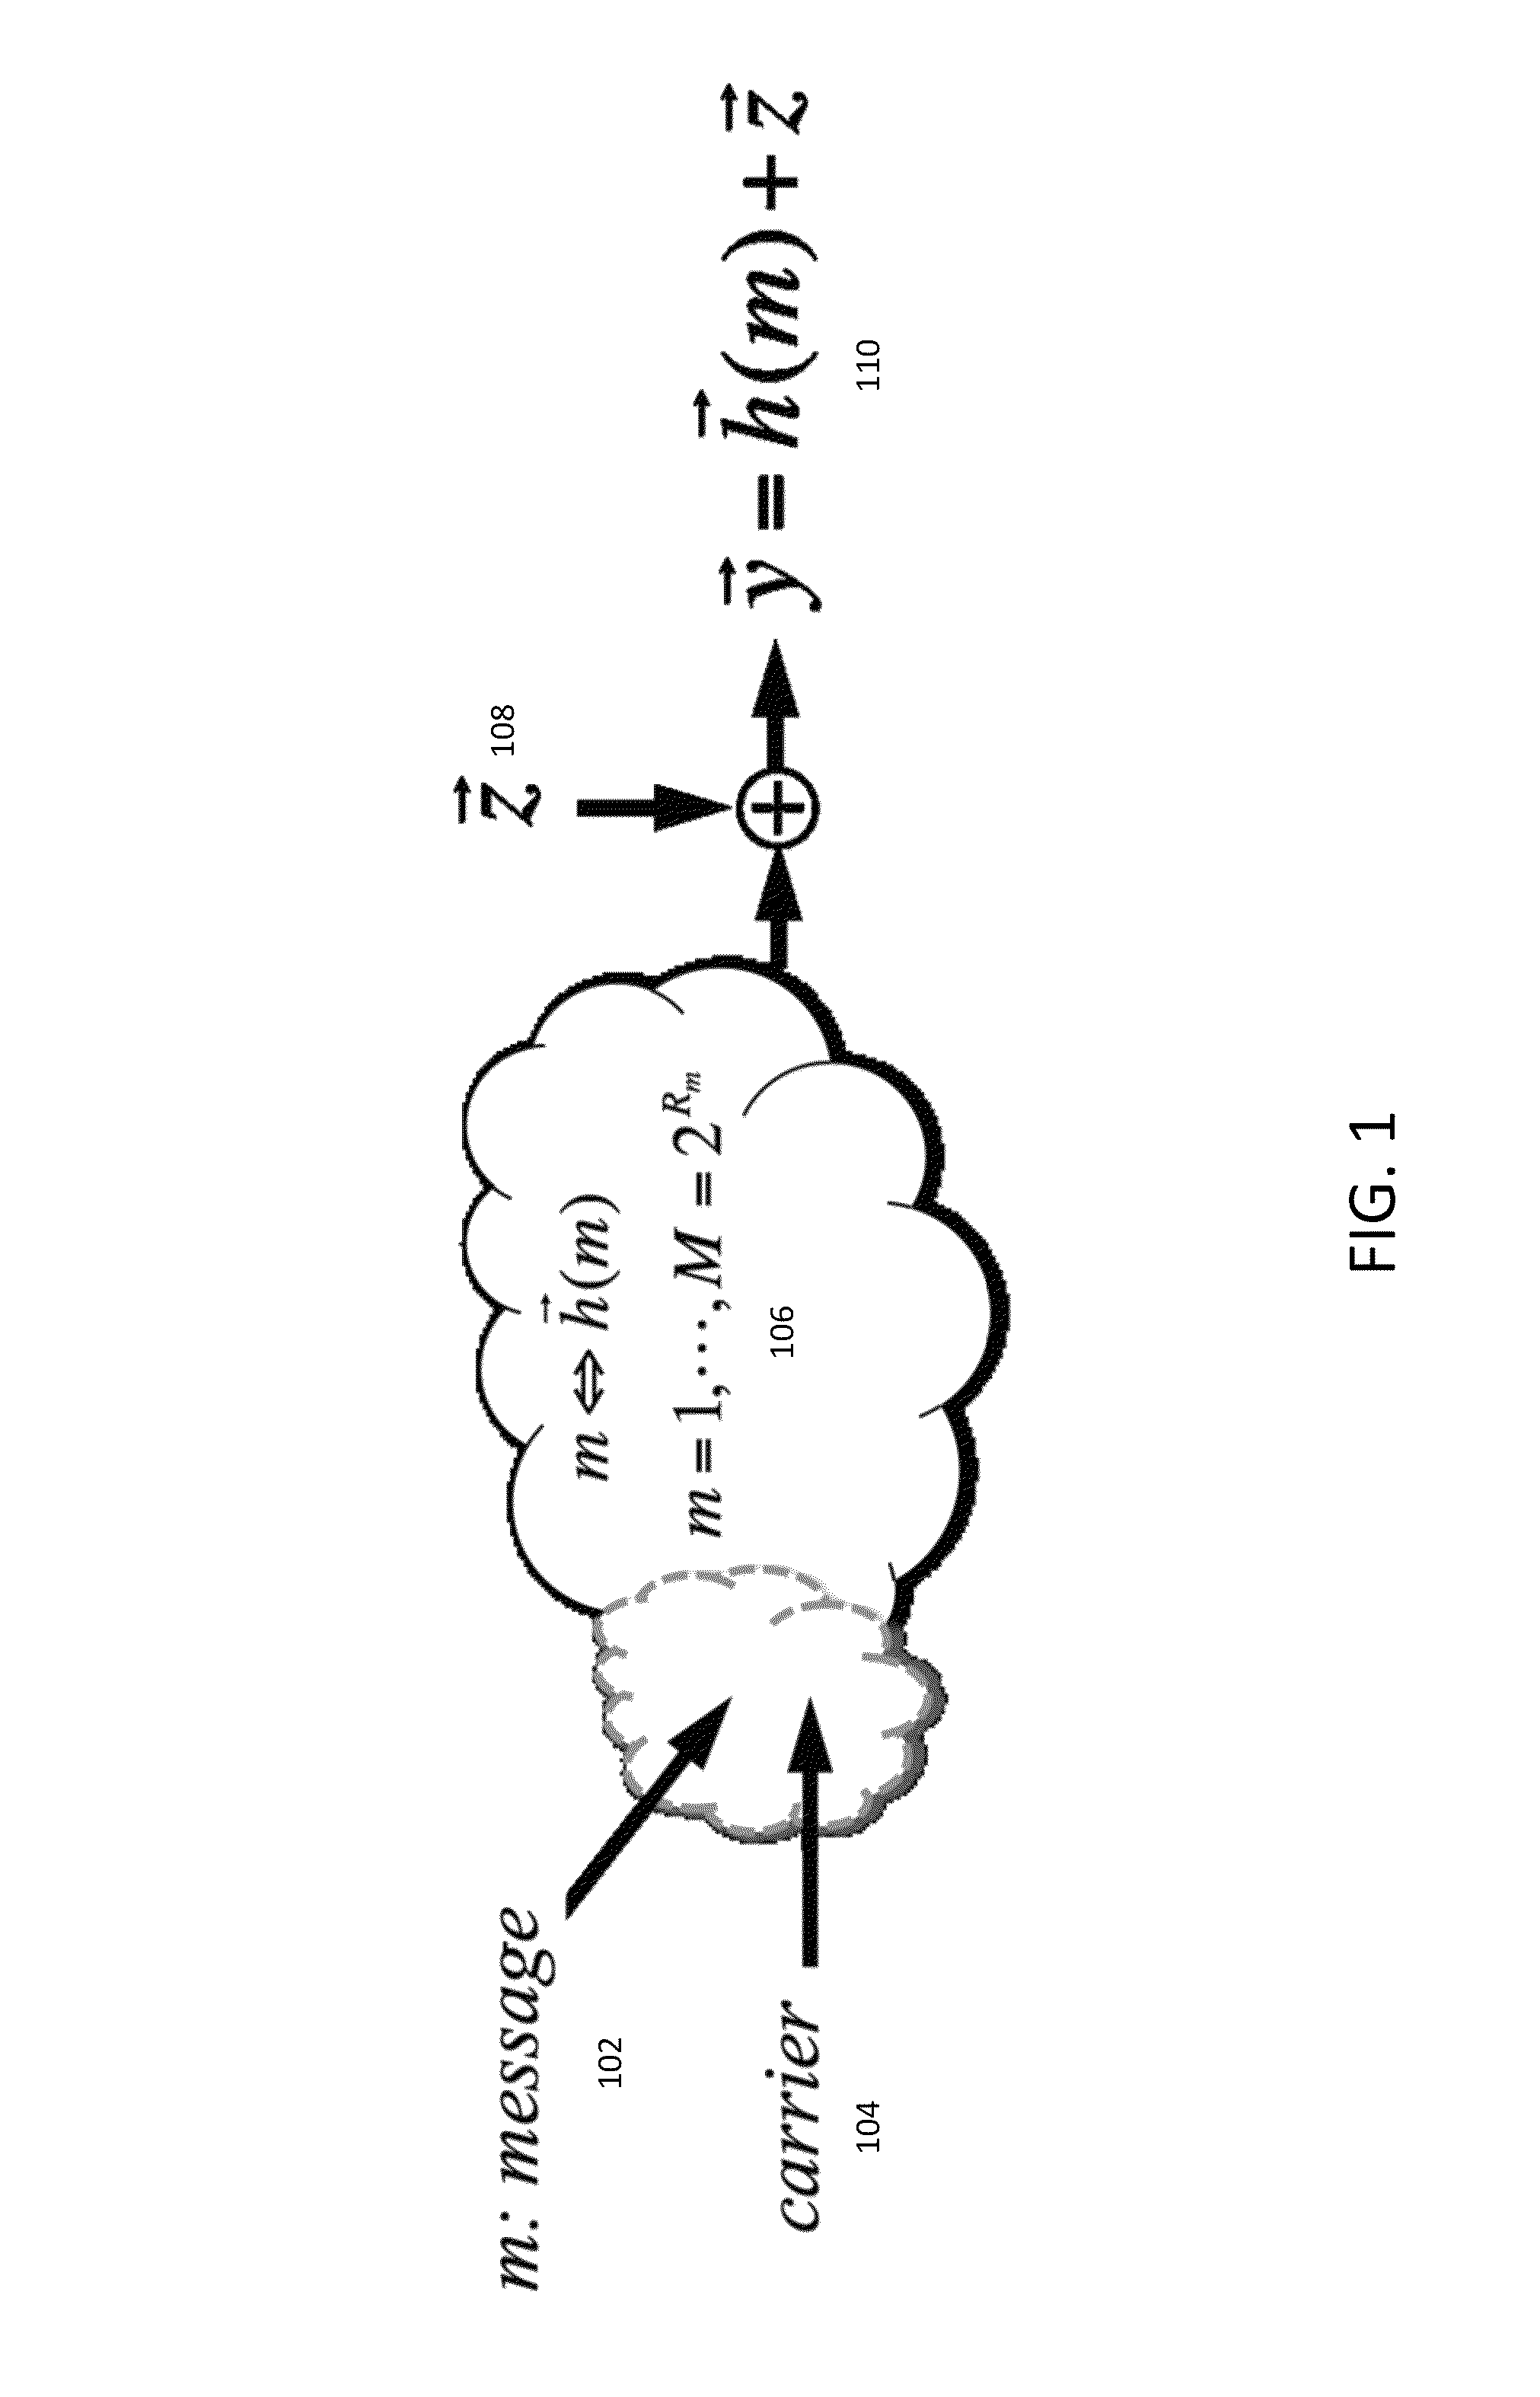 Wireless transmission with channel state perturbation